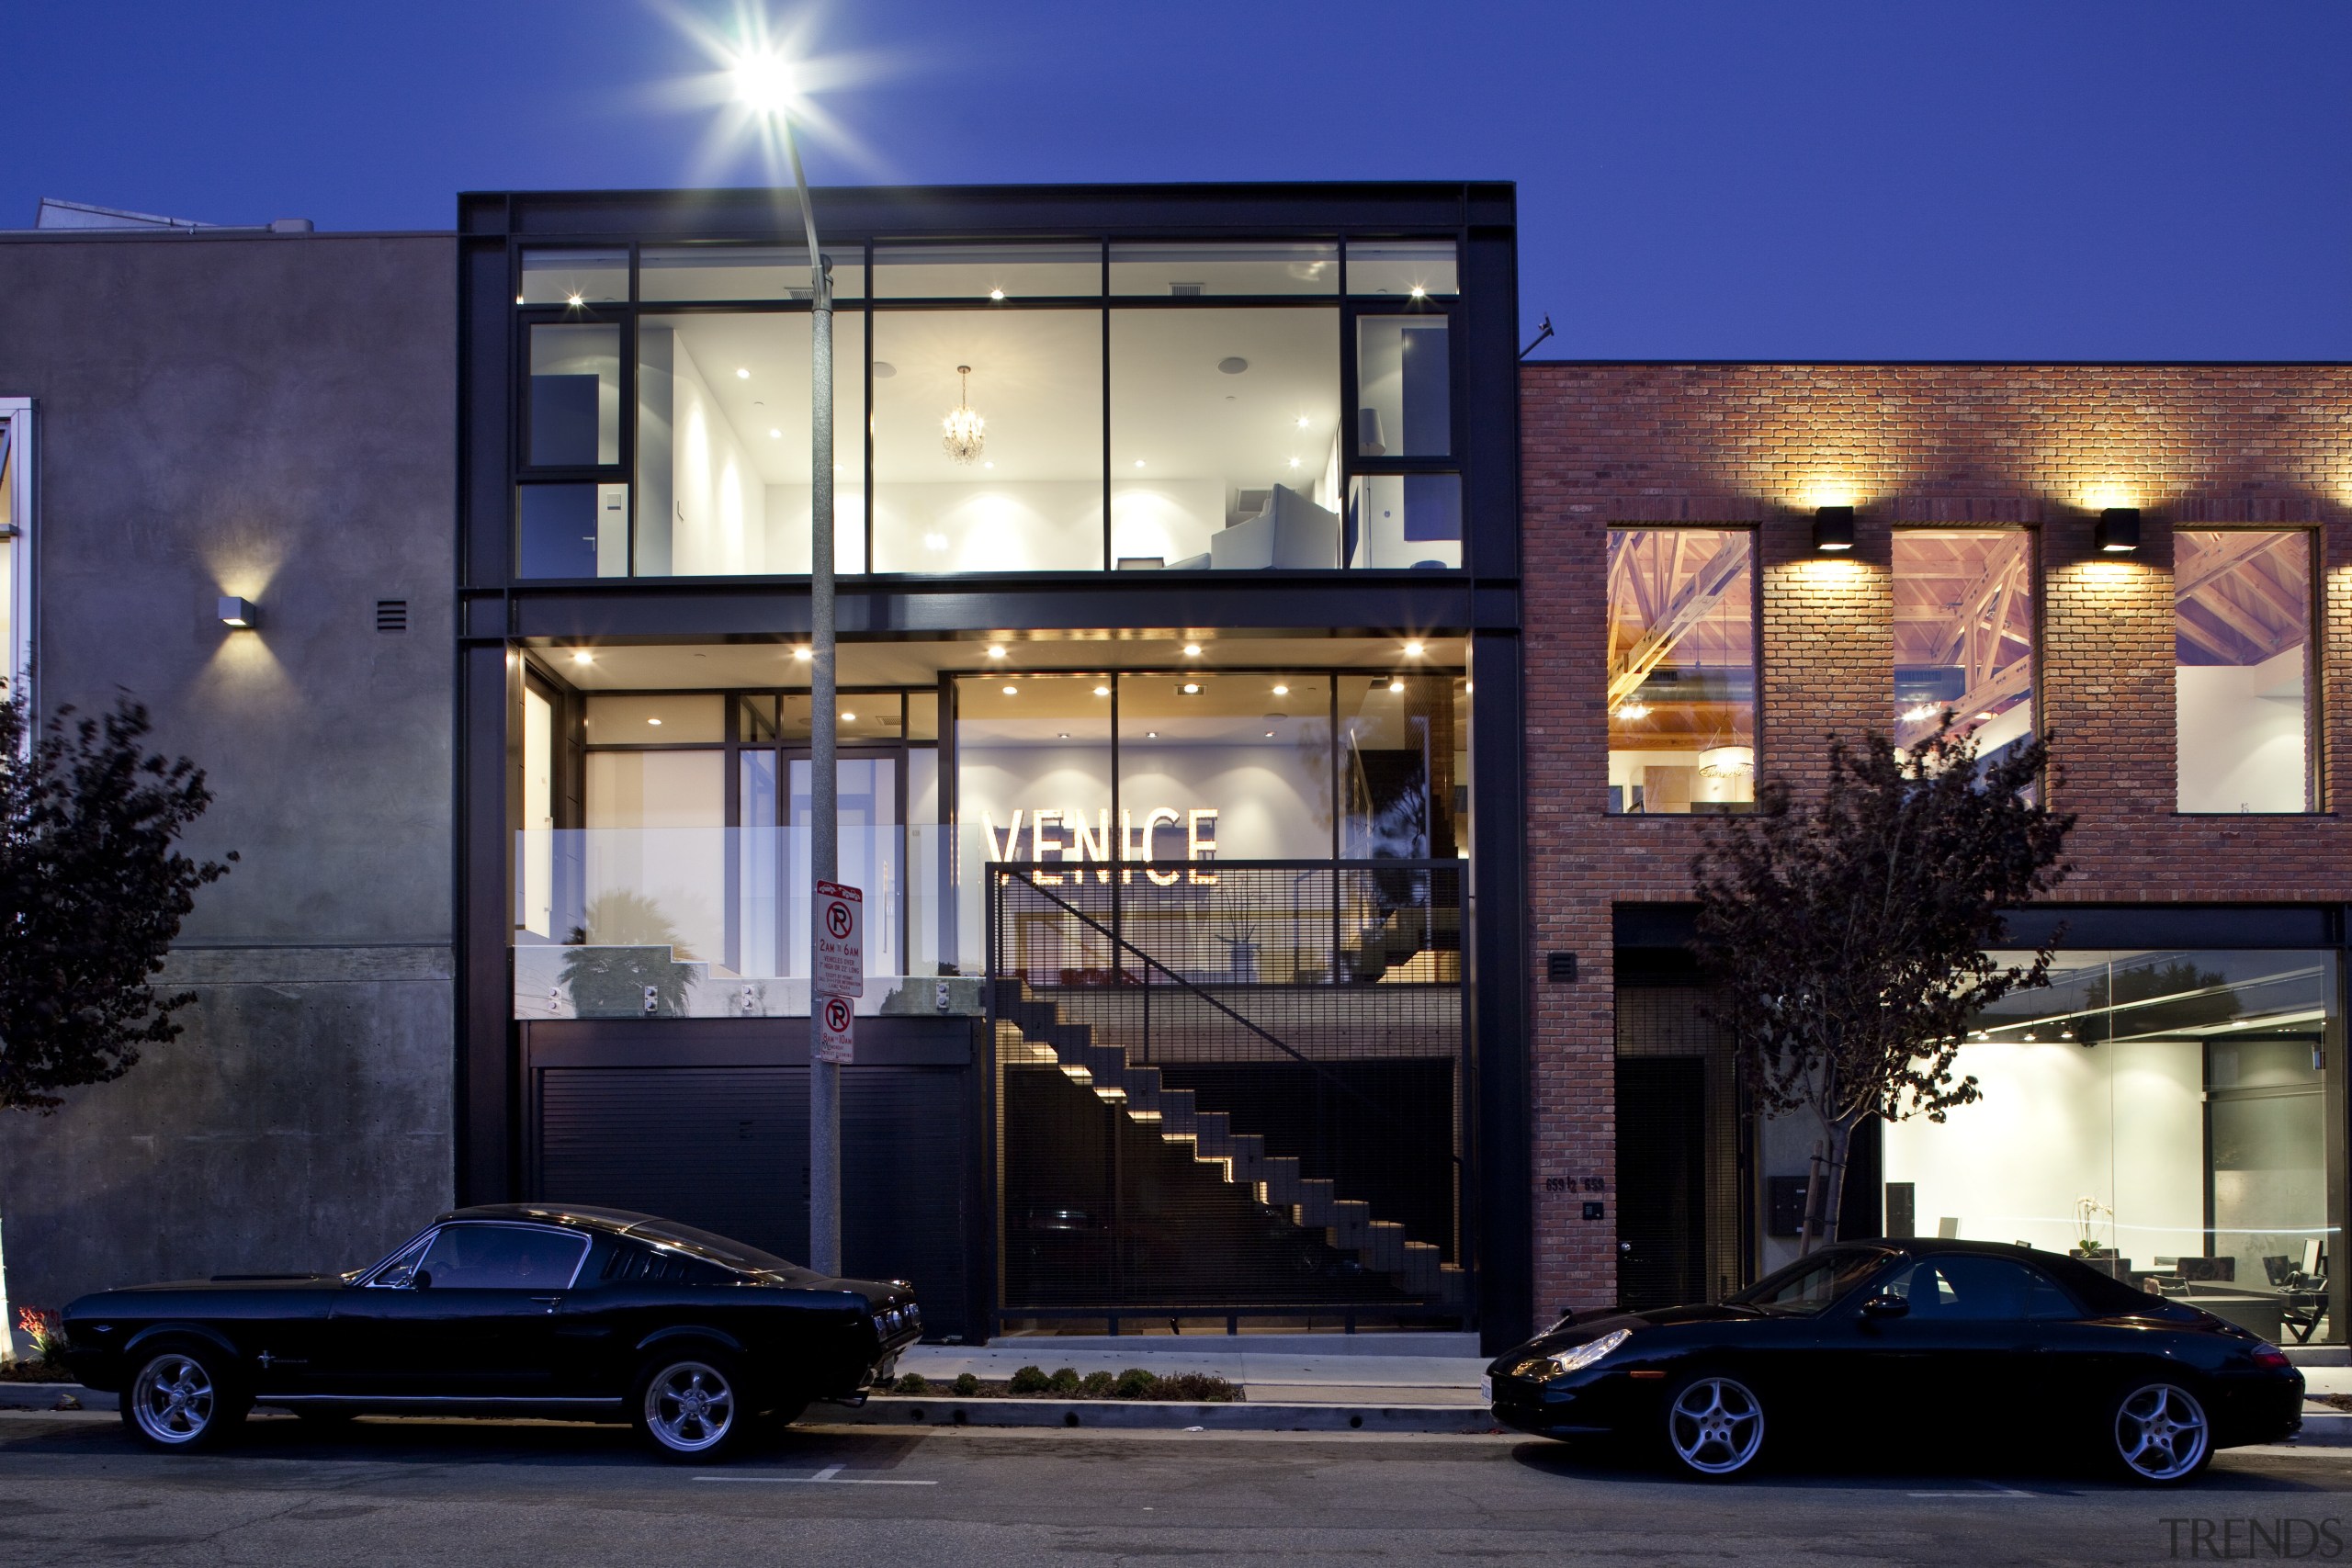 Exterior night view of contemporary building. - Exterior architecture, building, car, facade, family car, home, house, luxury vehicle, mixed use, night, real estate, residential area, window, blue, black